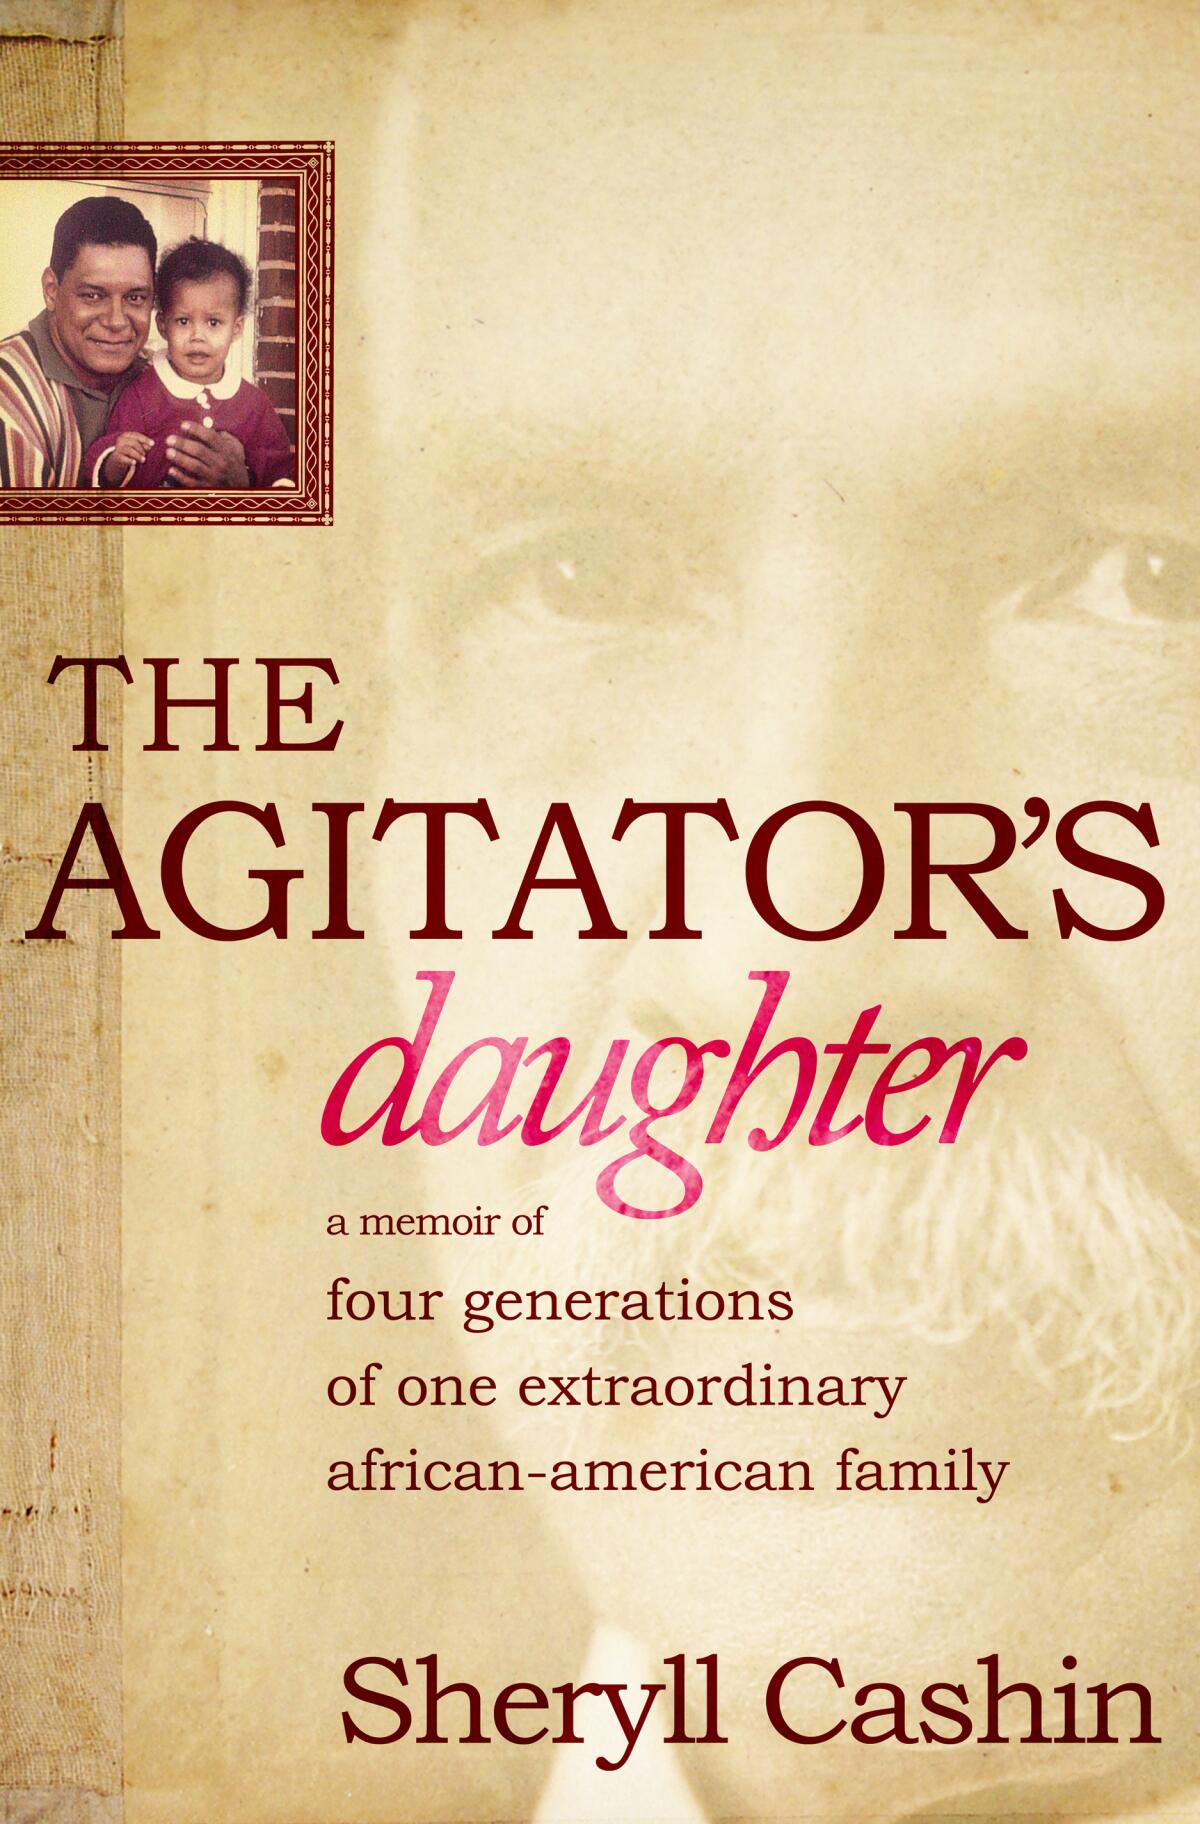 A book jacket for Sheryll Cashin's "The Agitator's Daughter." Credit: PublicAffairs